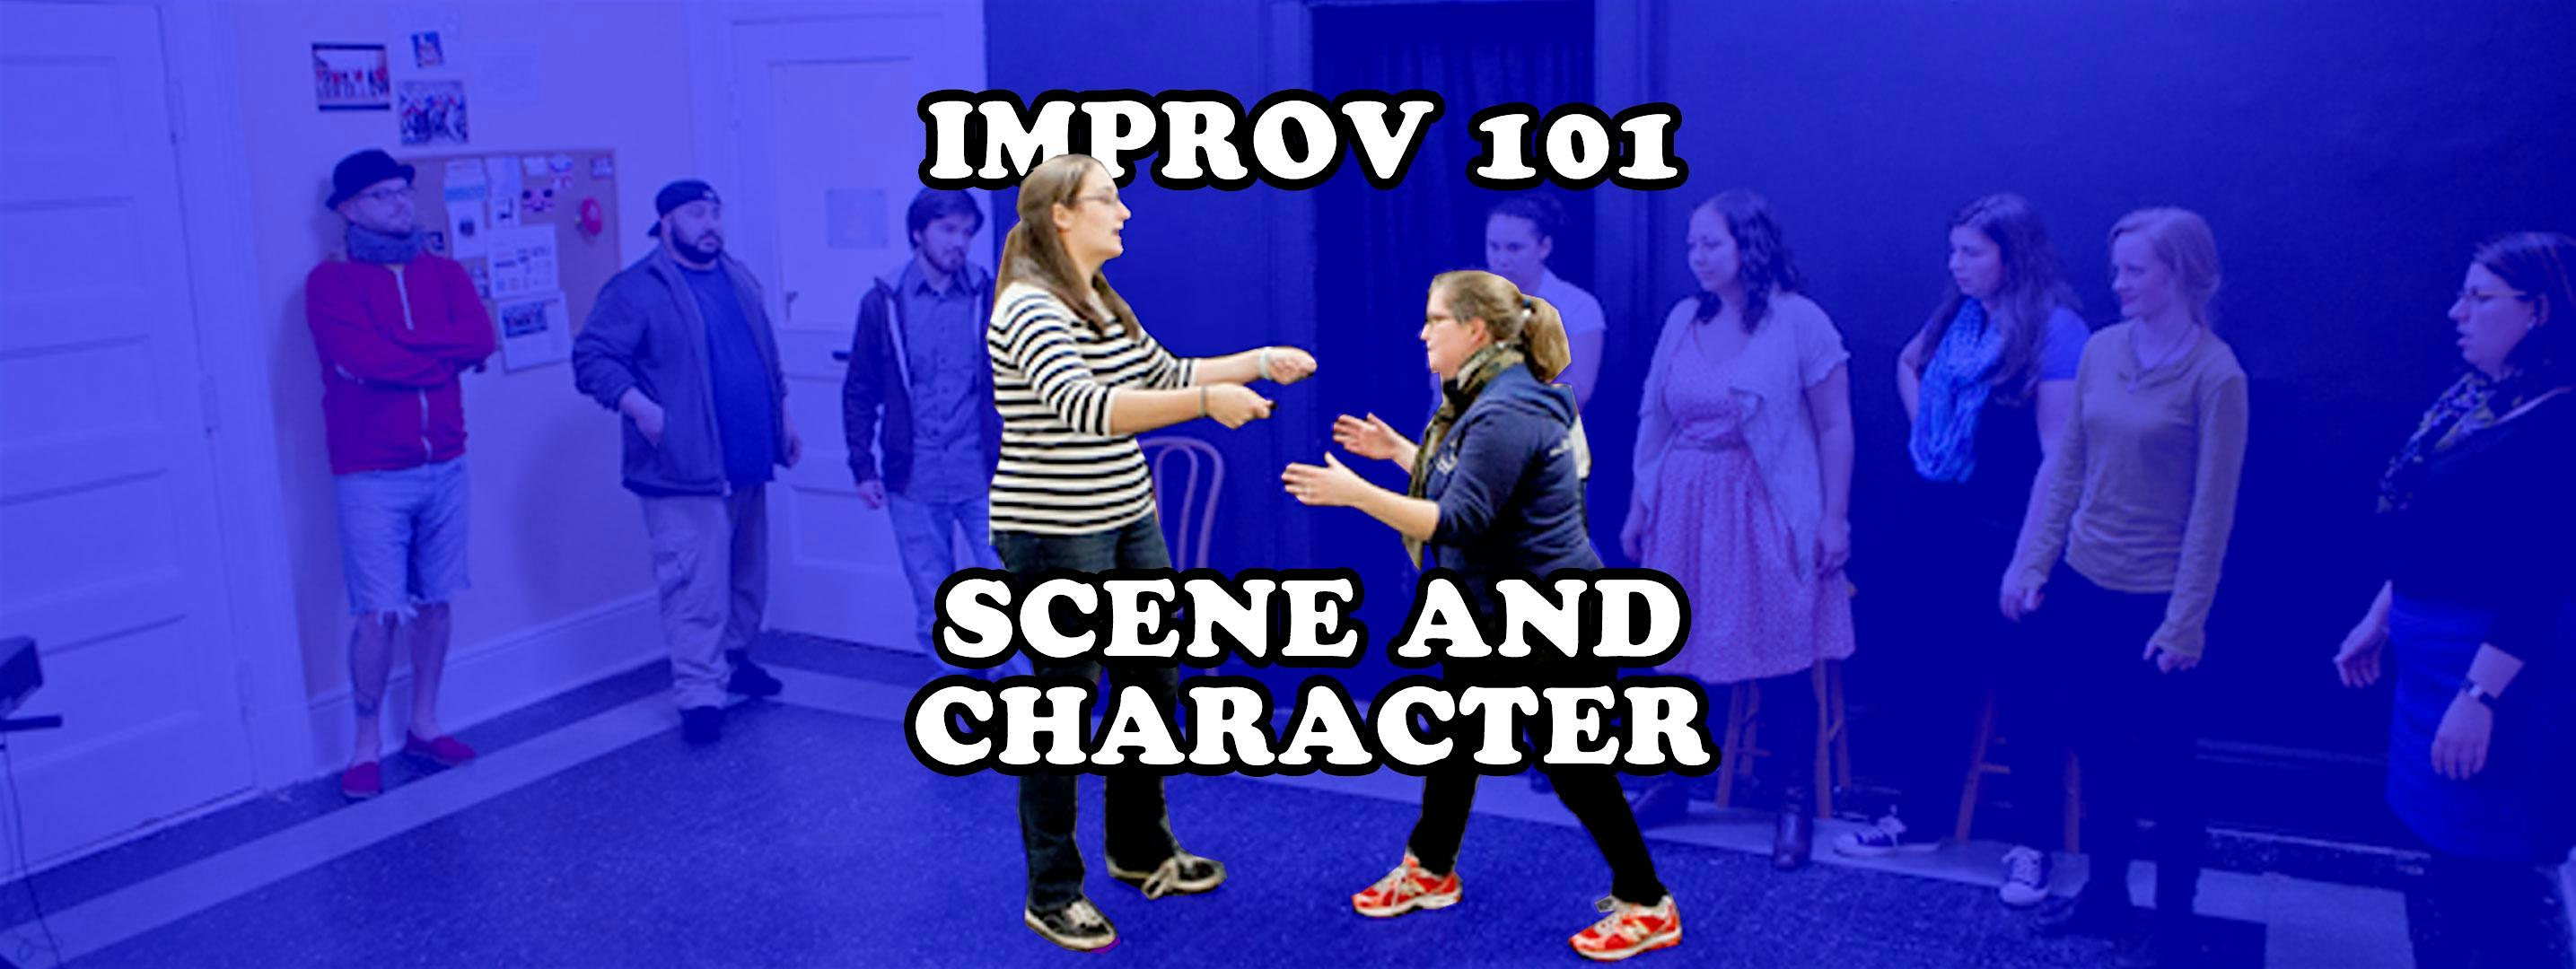 Improv 101 - Scene and Character (Intensive)